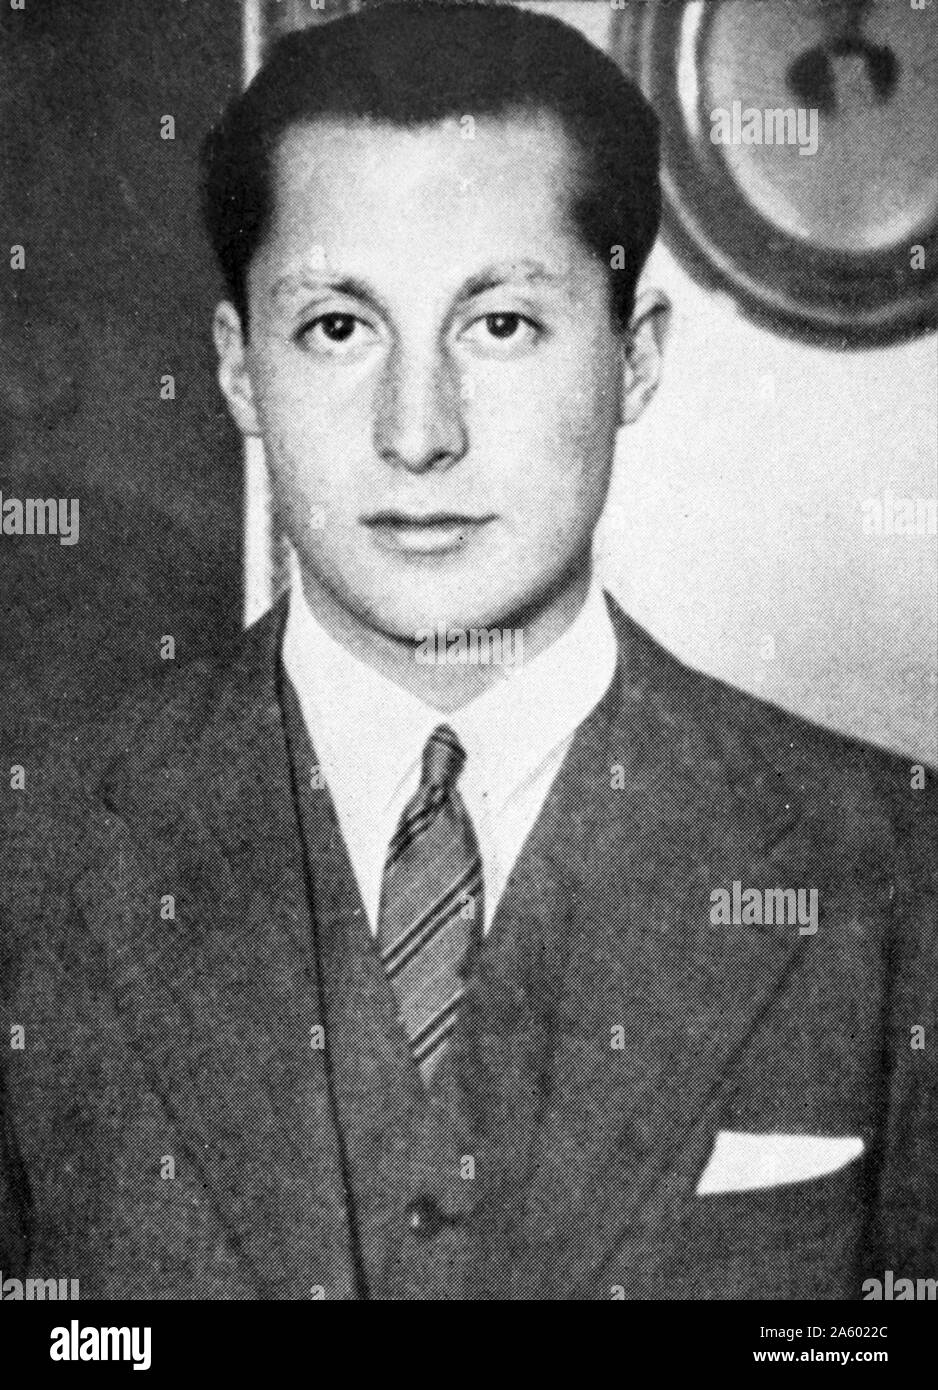 José Antonio Primo de Rivera (1903 – November 20, 1936). Spanish lawyer, nobleman, politician, and founder of the Falange Española, executed by the Spanish republican government during the course of the Spanish Civil War. Stock Photo